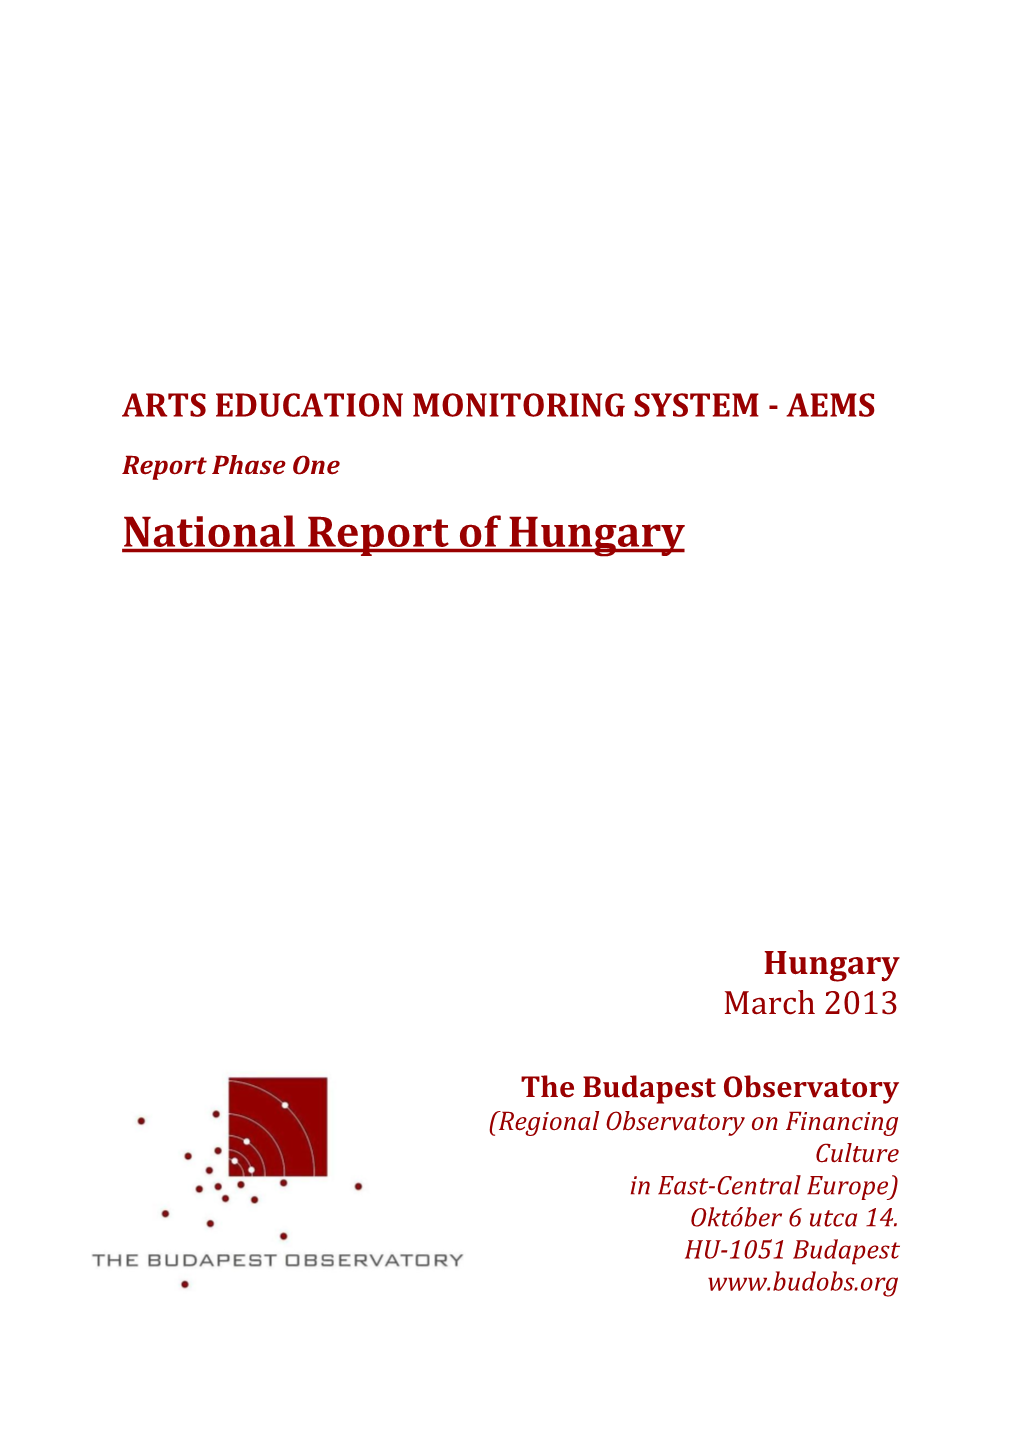 Hungarian Report on Arts Education in Hungary